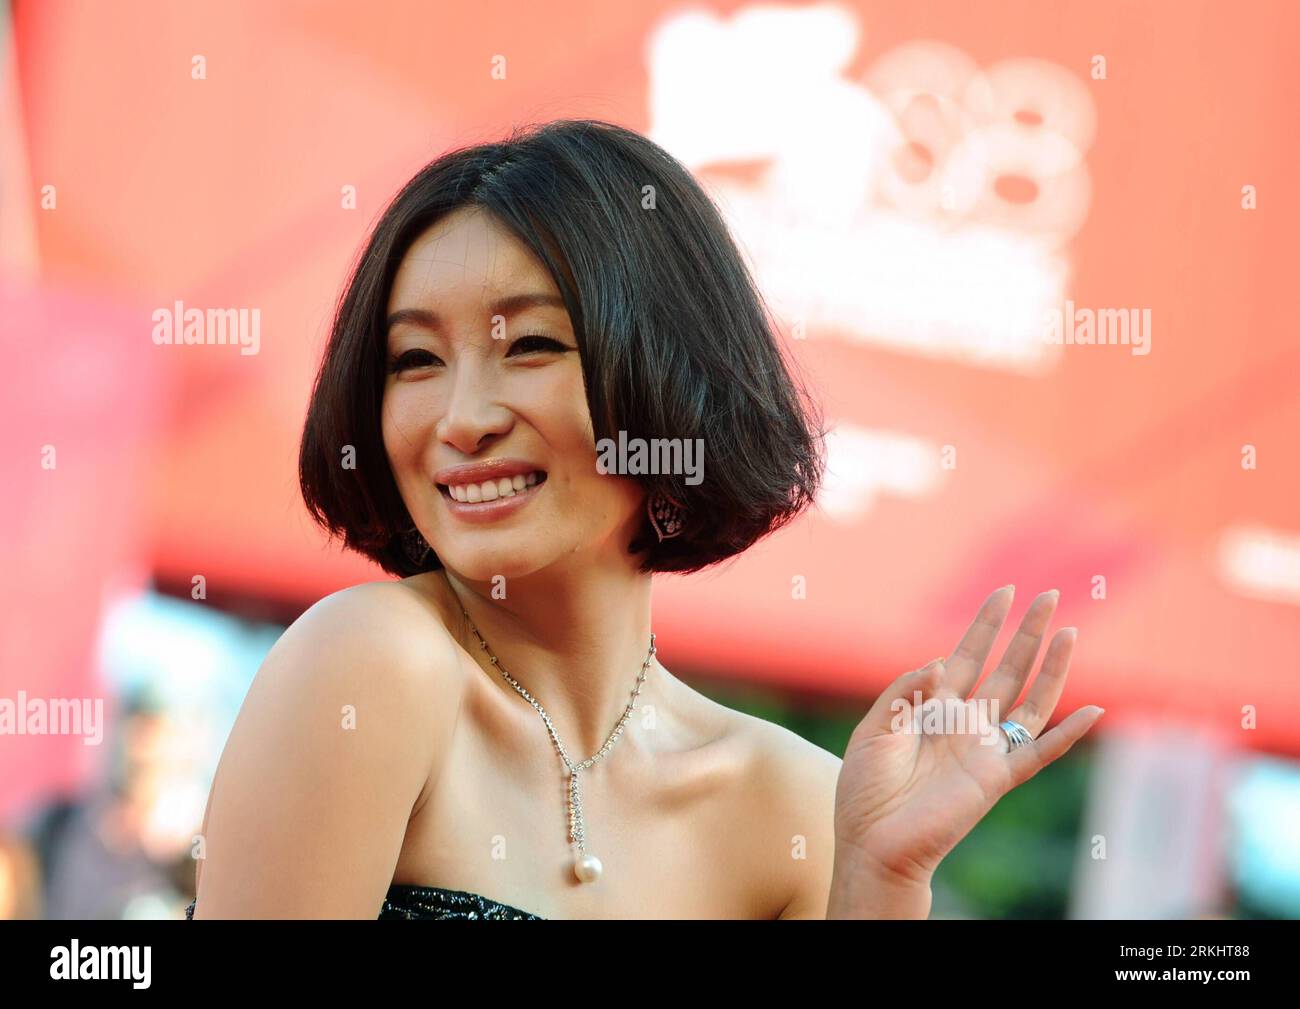 Bildnummer: 55896877  Datum: 05.09.2011  Copyright: imago/Xinhua (110906) -- VENICE, Sept. 6, 2011 (Xinhua) -- Actress Qin Hailu poses on the red carpet for the premiere of the Chinese Hong Kong film Taojie (A Simple Life) at the 68th Venice International Film Festival in Venice, Italy, Sept. 5, 2011. (Xinhua/Wang Qingqin) (djj) ITALY-VENICE-FILM FESTIVAL-TAOJIE-PREMIERE PUBLICATIONxNOTxINxCHN People Film Kultur 68 Filmfestival Venedig Entertainment Filmpremiere Porträt x0x xtm premiumd 2011 quer      55896877 Date 05 09 2011 Copyright Imago XINHUA  Venice Sept 6 2011 XINHUA actress Qin Hailu Stock Photo